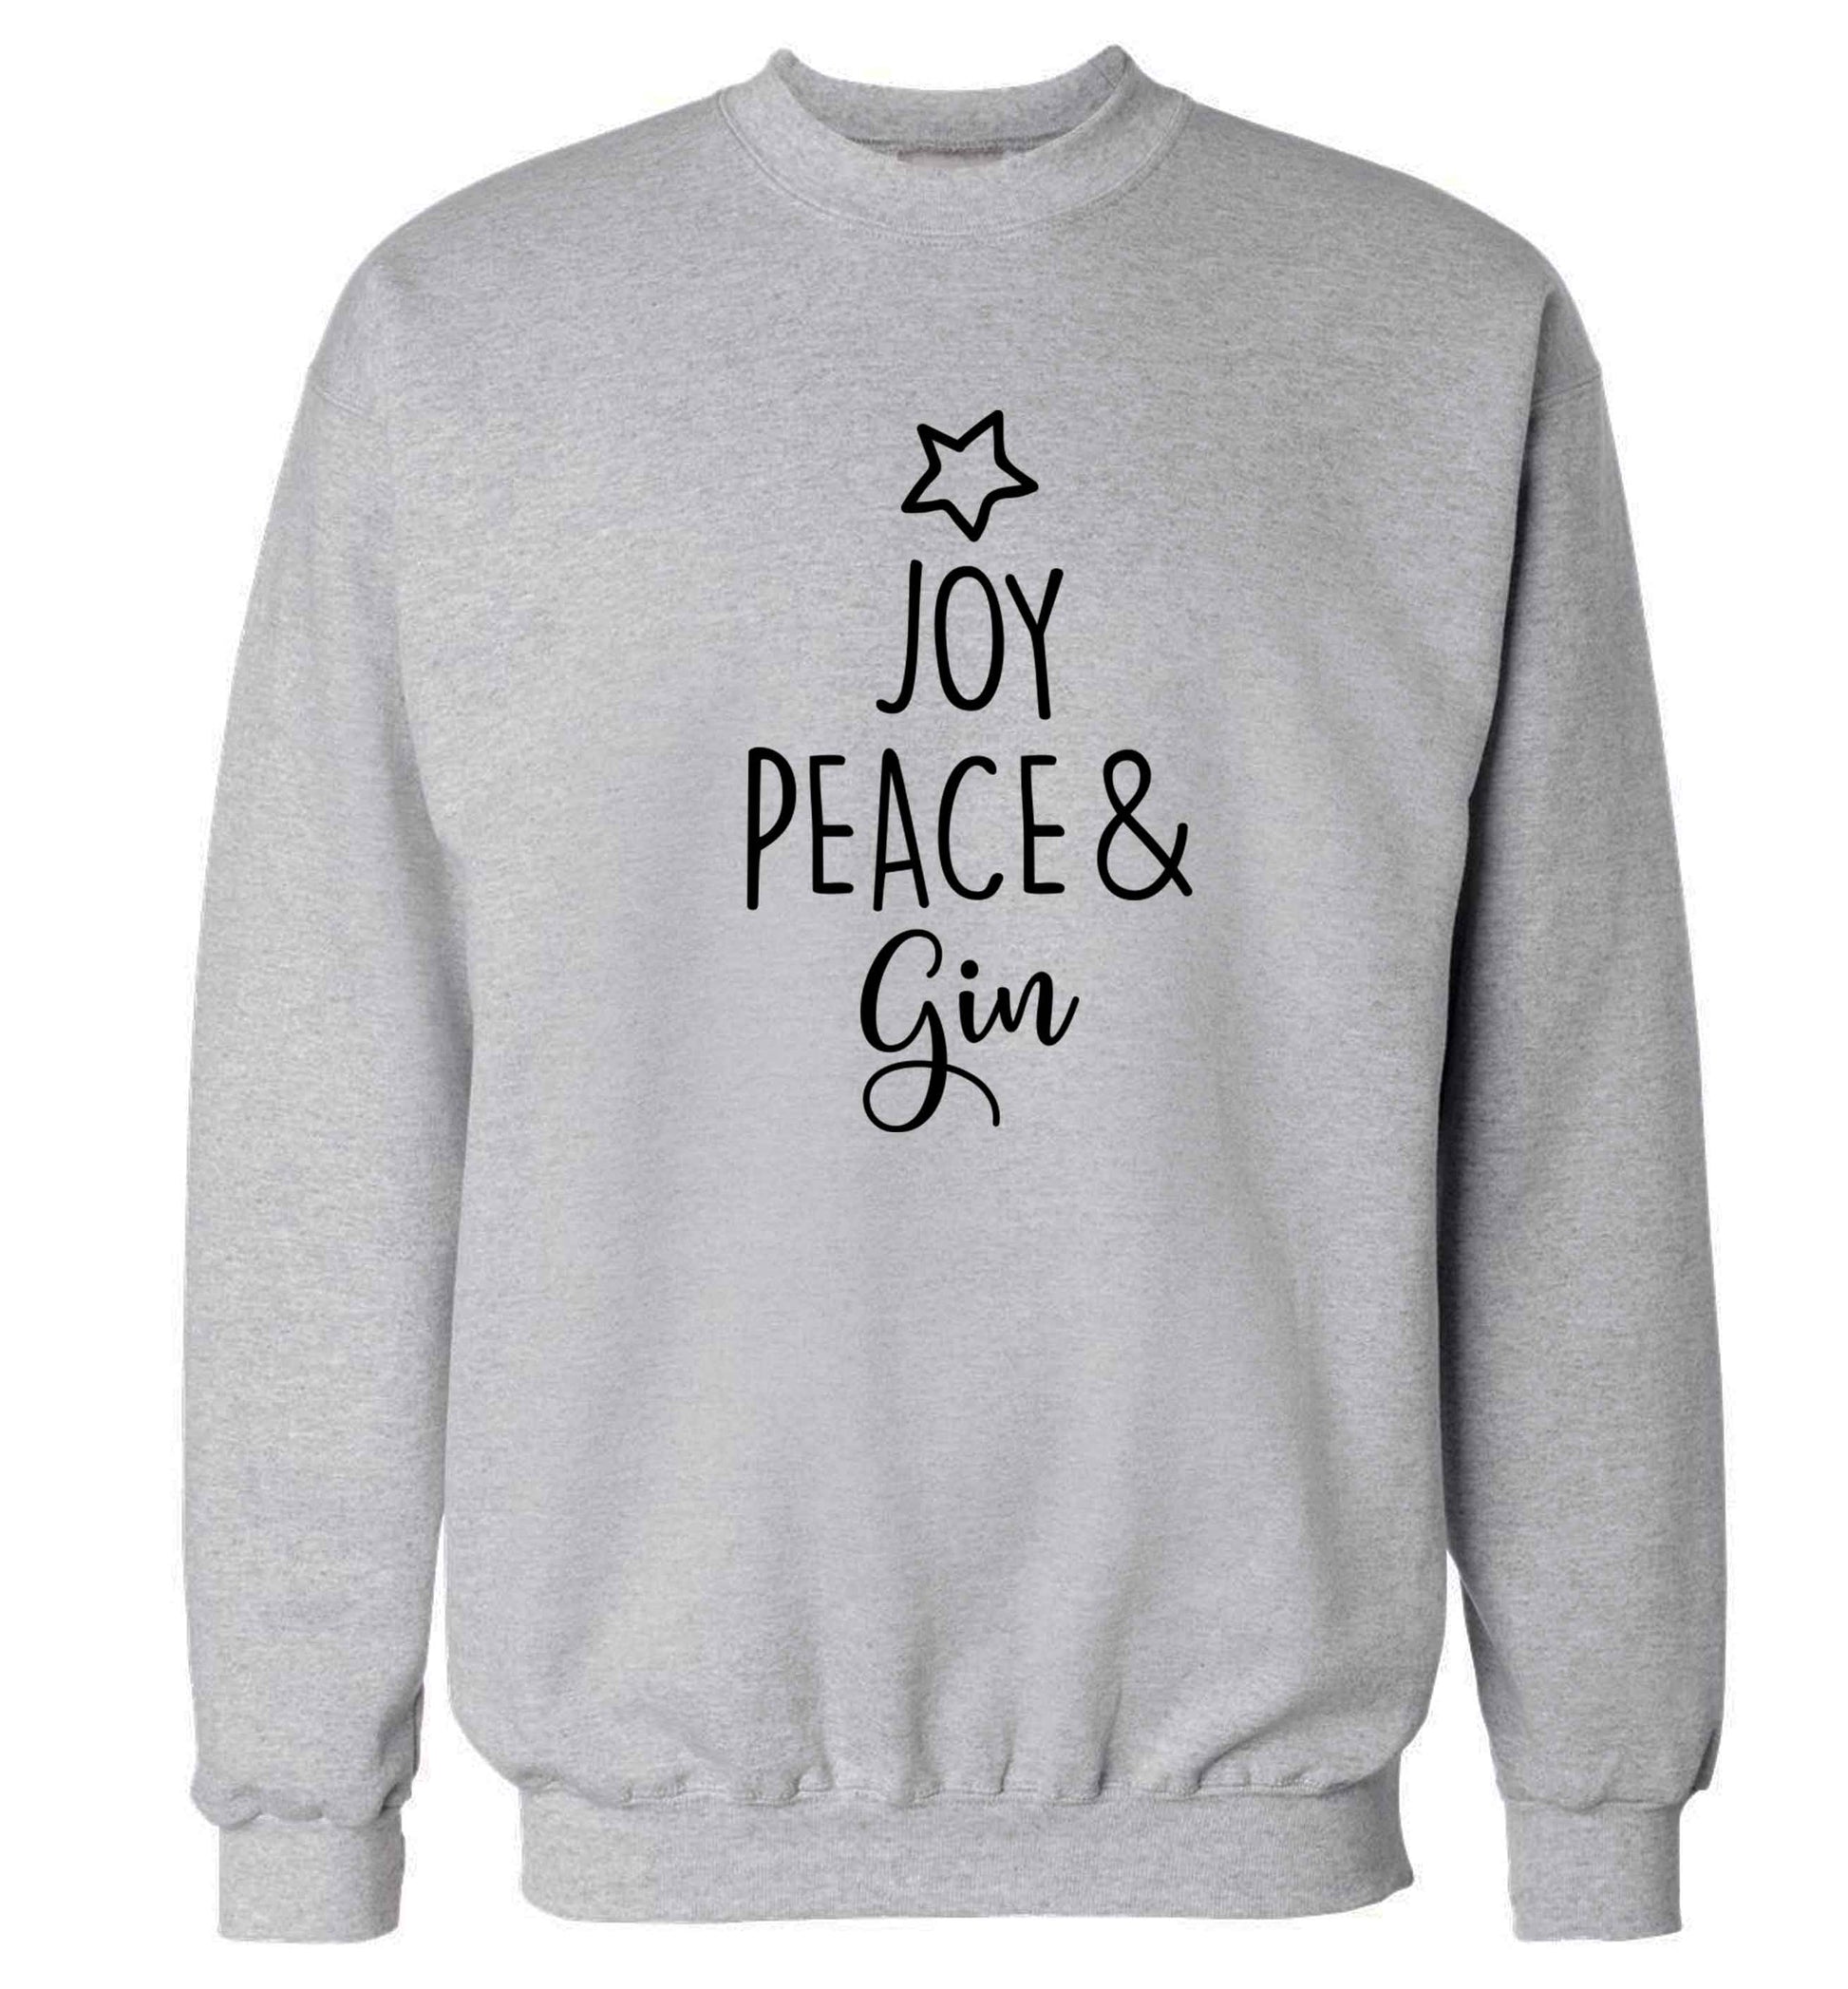 Joy peace and gin Adult's unisex grey Sweater 2XL